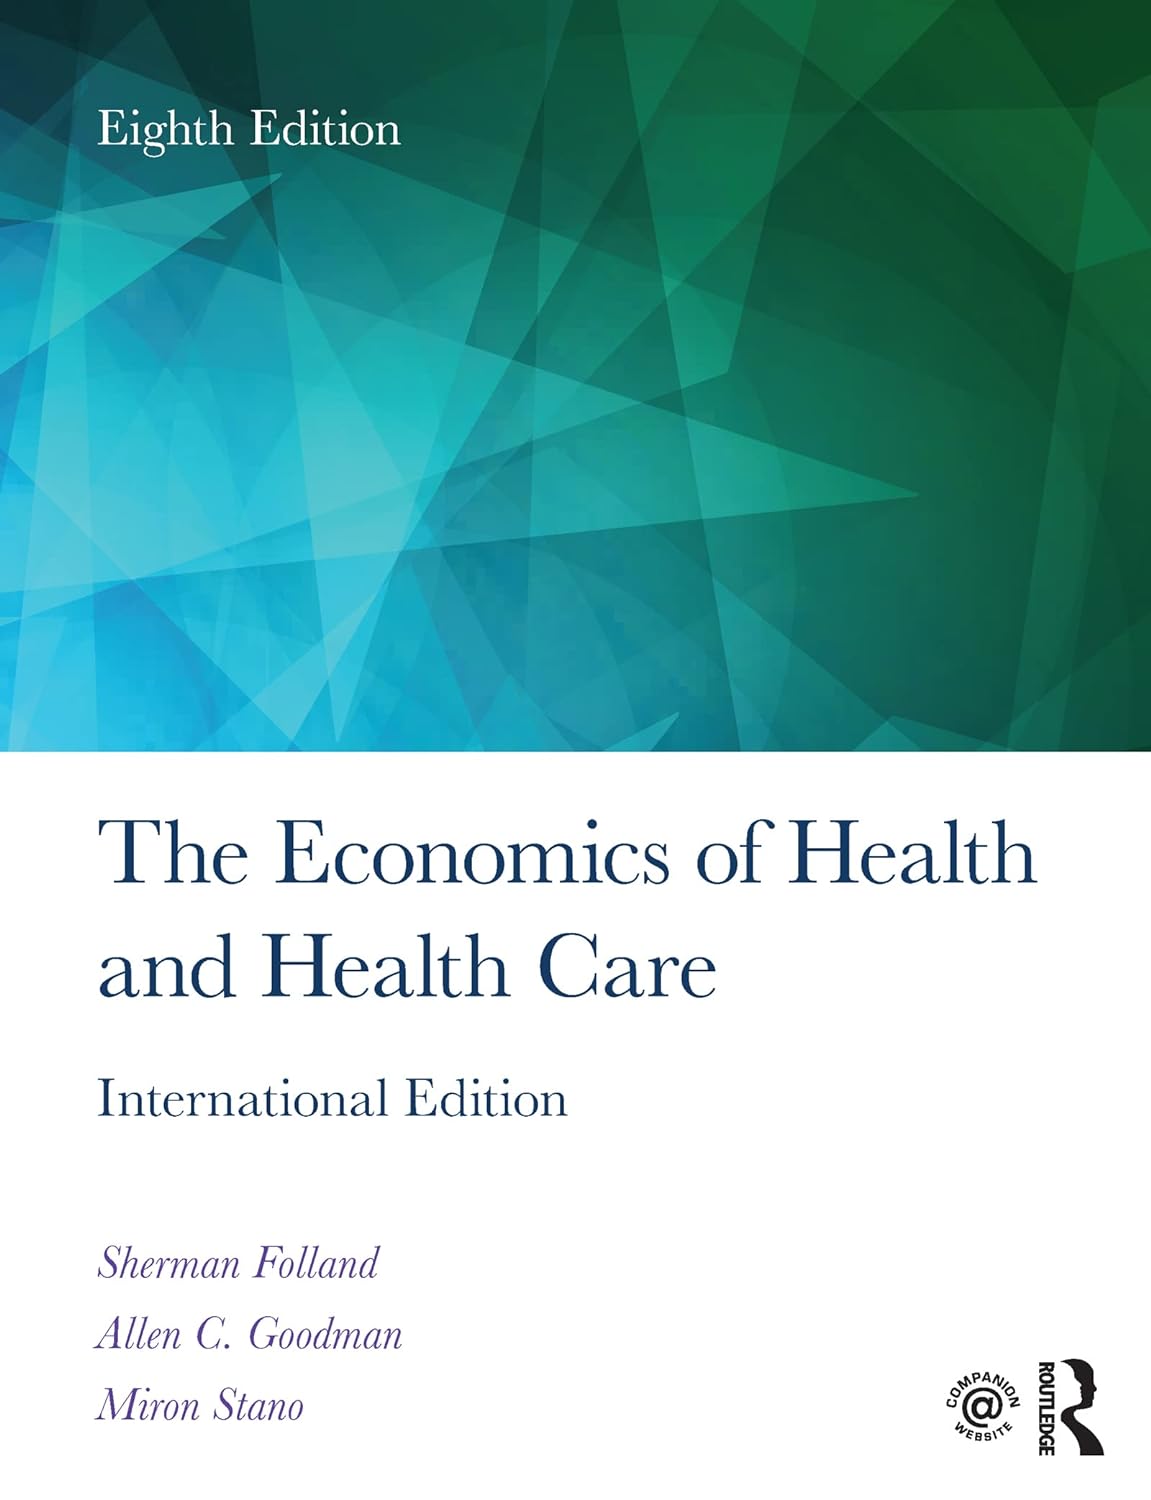 The Economics of Health and Health Care 8th Edition